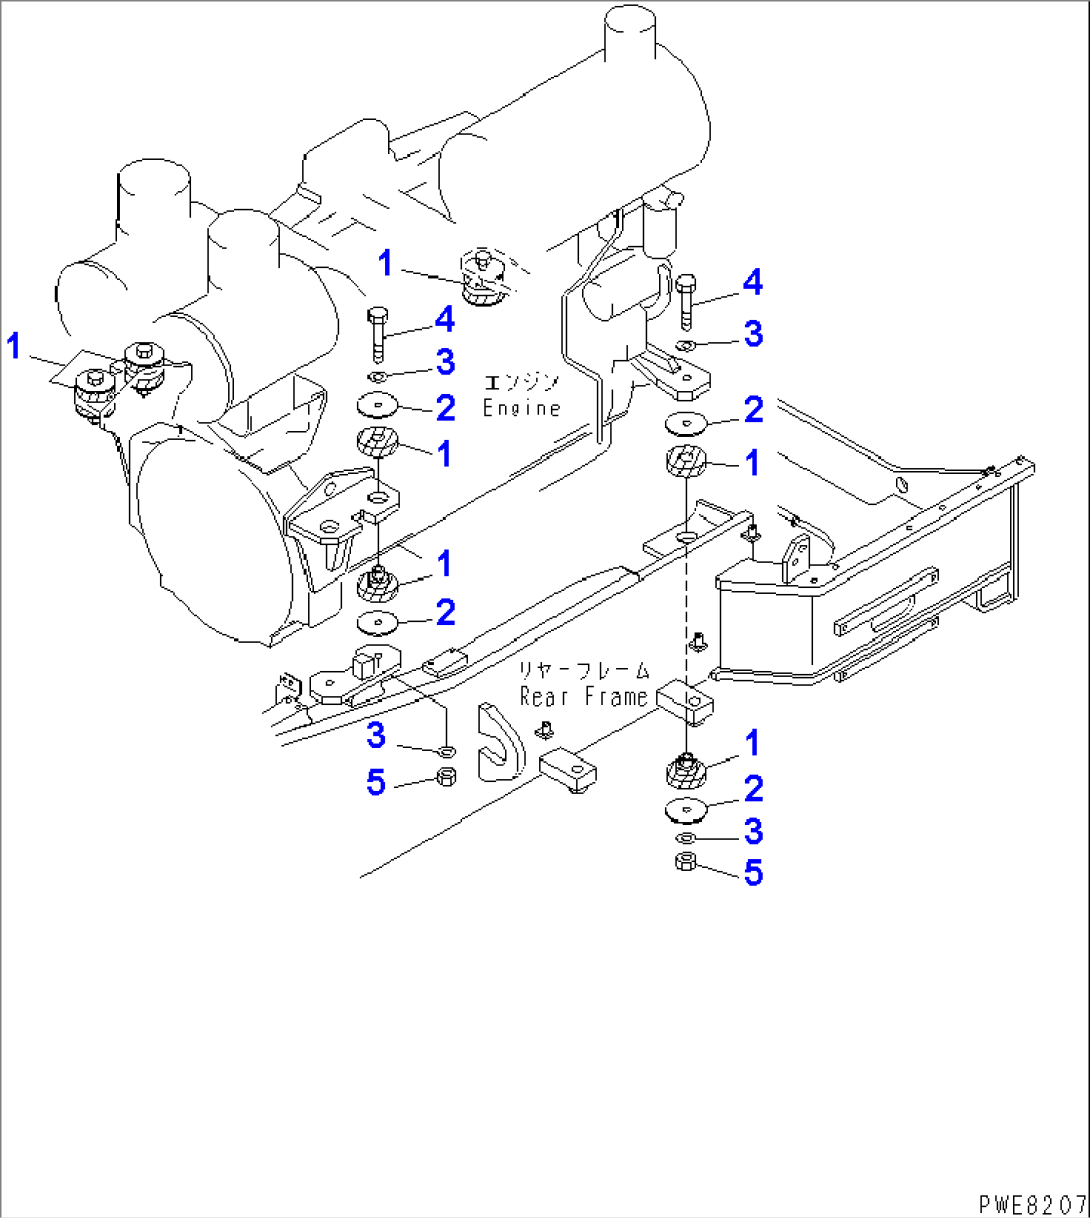 ENGINE MOUNTING (MOUNTING PARTS)(#50001-51000)